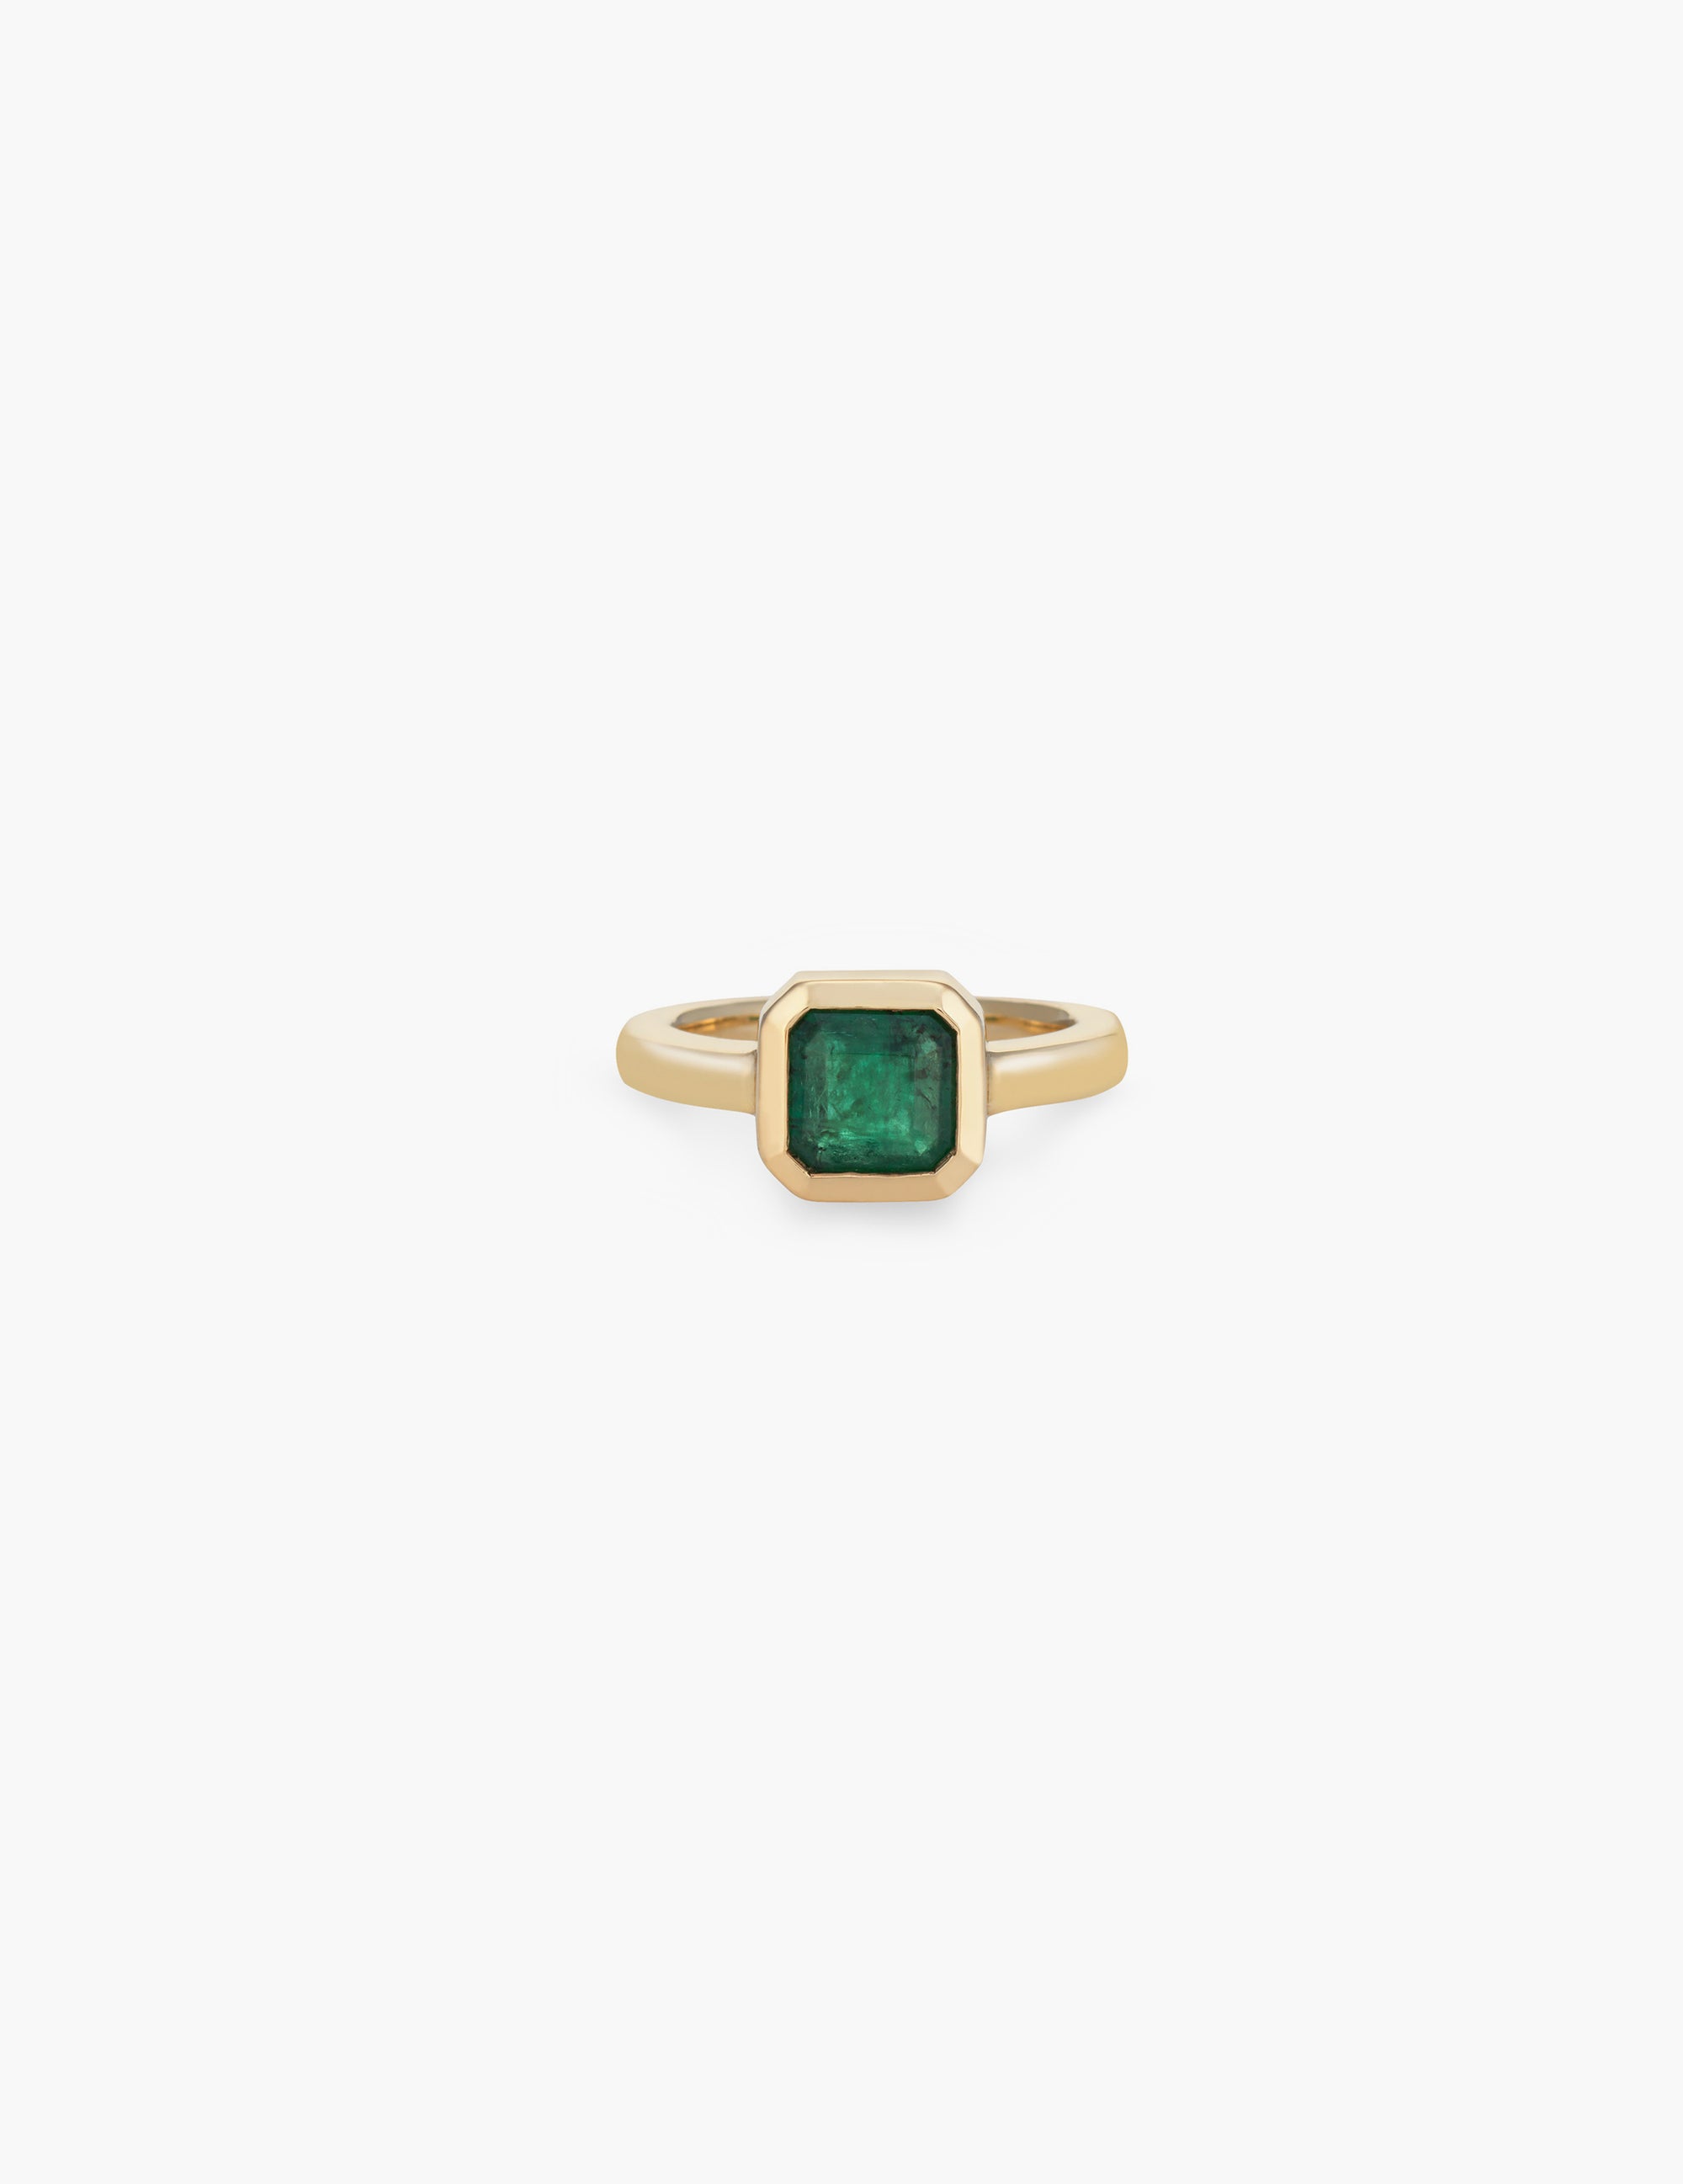 1.7ct Emerald Ring Set in 18k